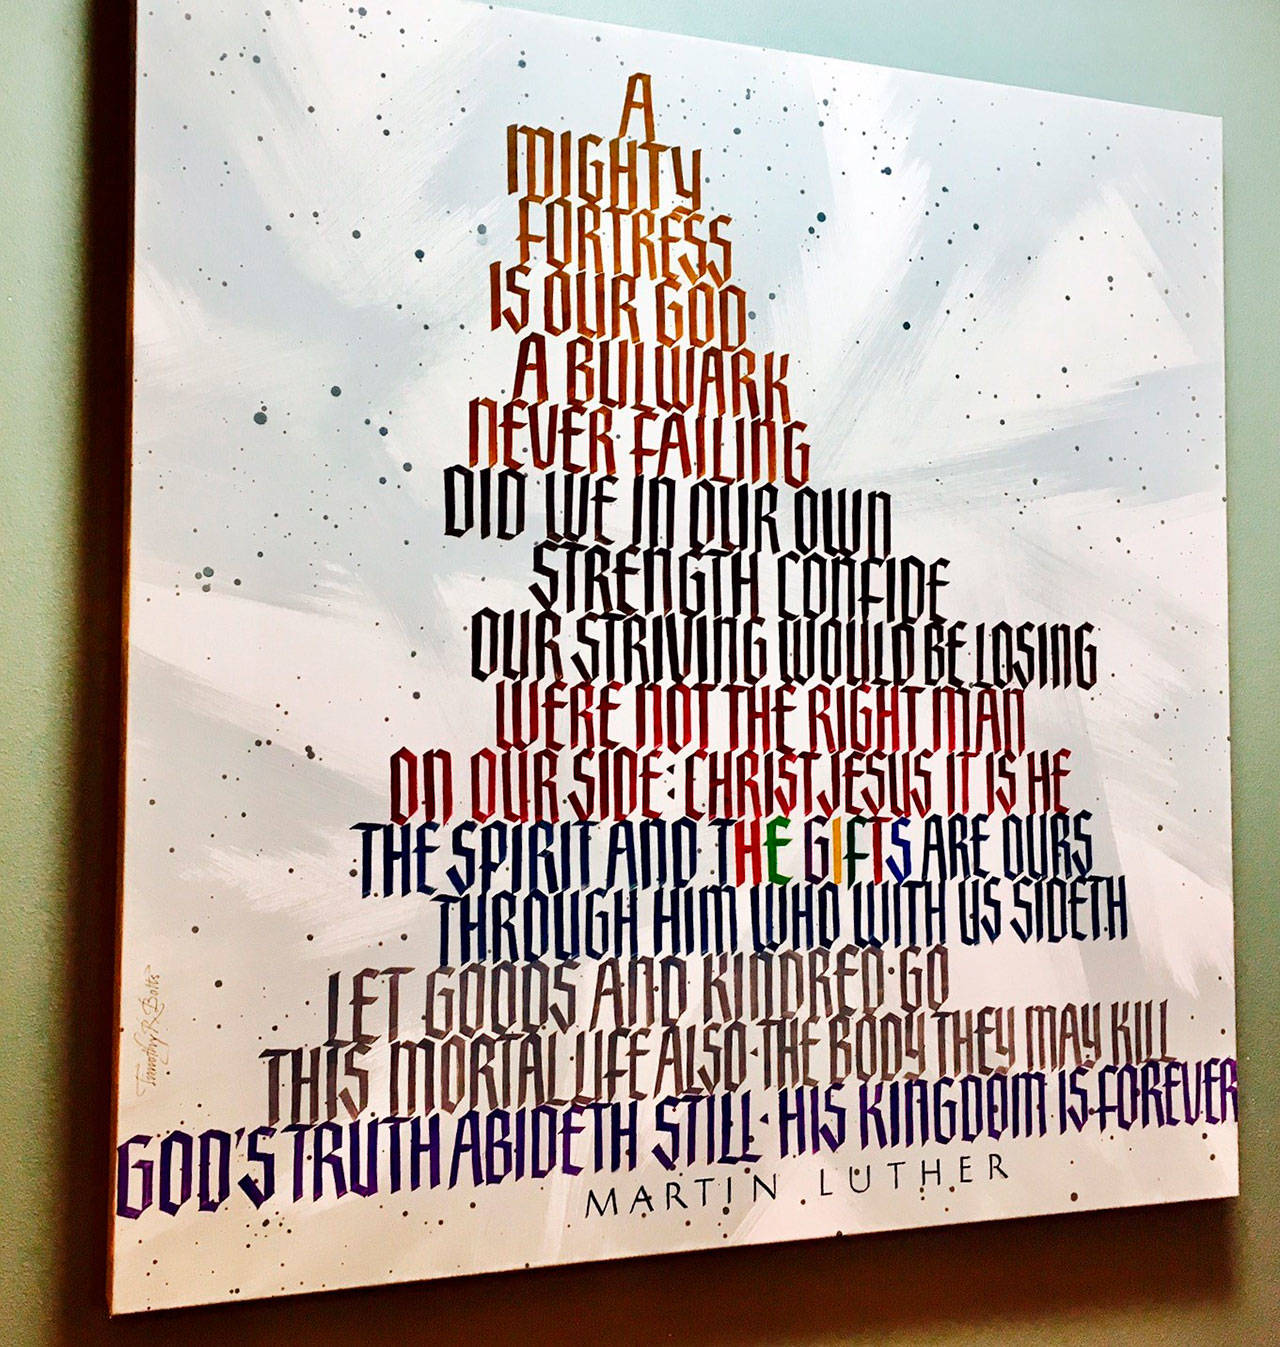 This original art commissioned by Covenant Shores pays homage to Martin Luther’s most well-known hymn “A Mighty Fortress Is Our God.” Photo courtesy of Greg Asimakoupoulos